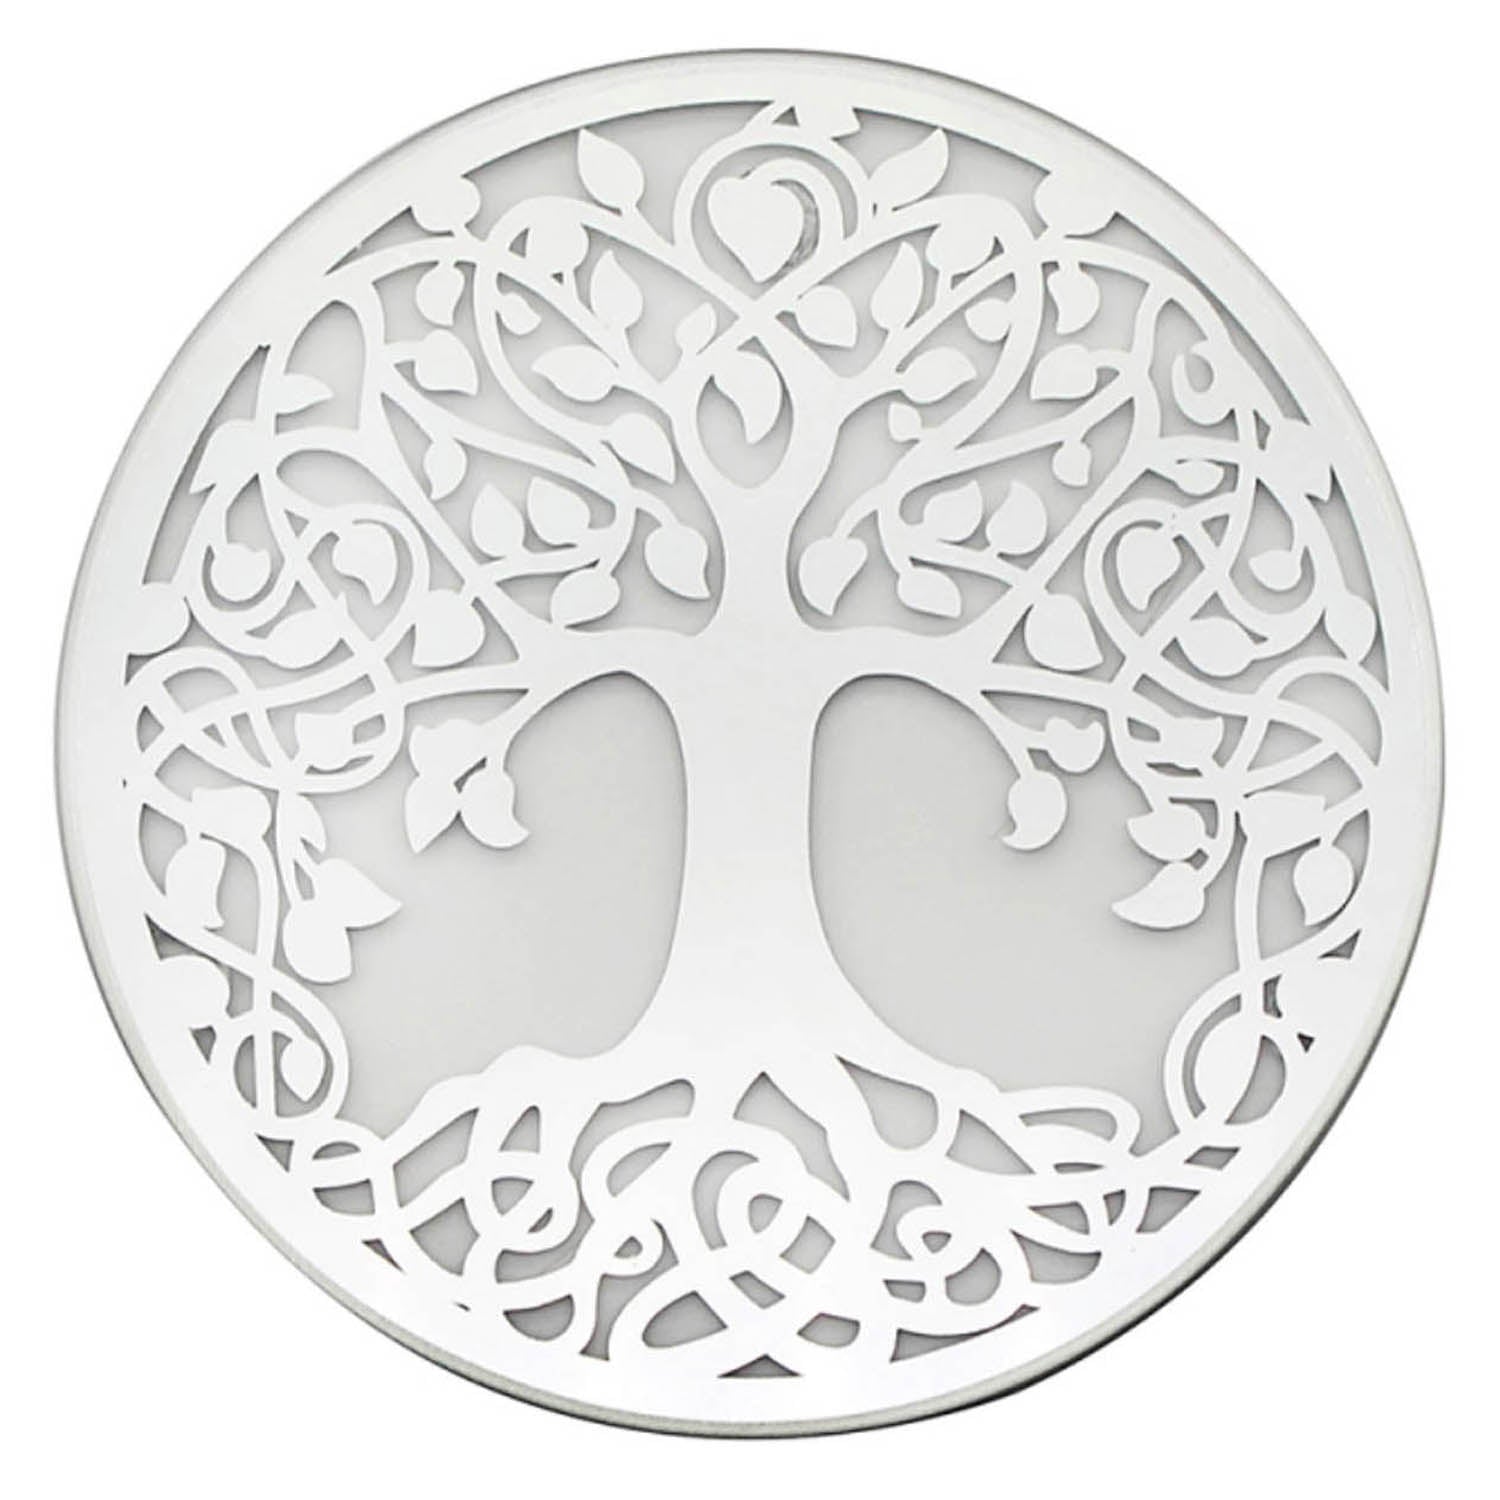 Mirror Tree Of Life Round Mirrored Votive Candles Plate Tray